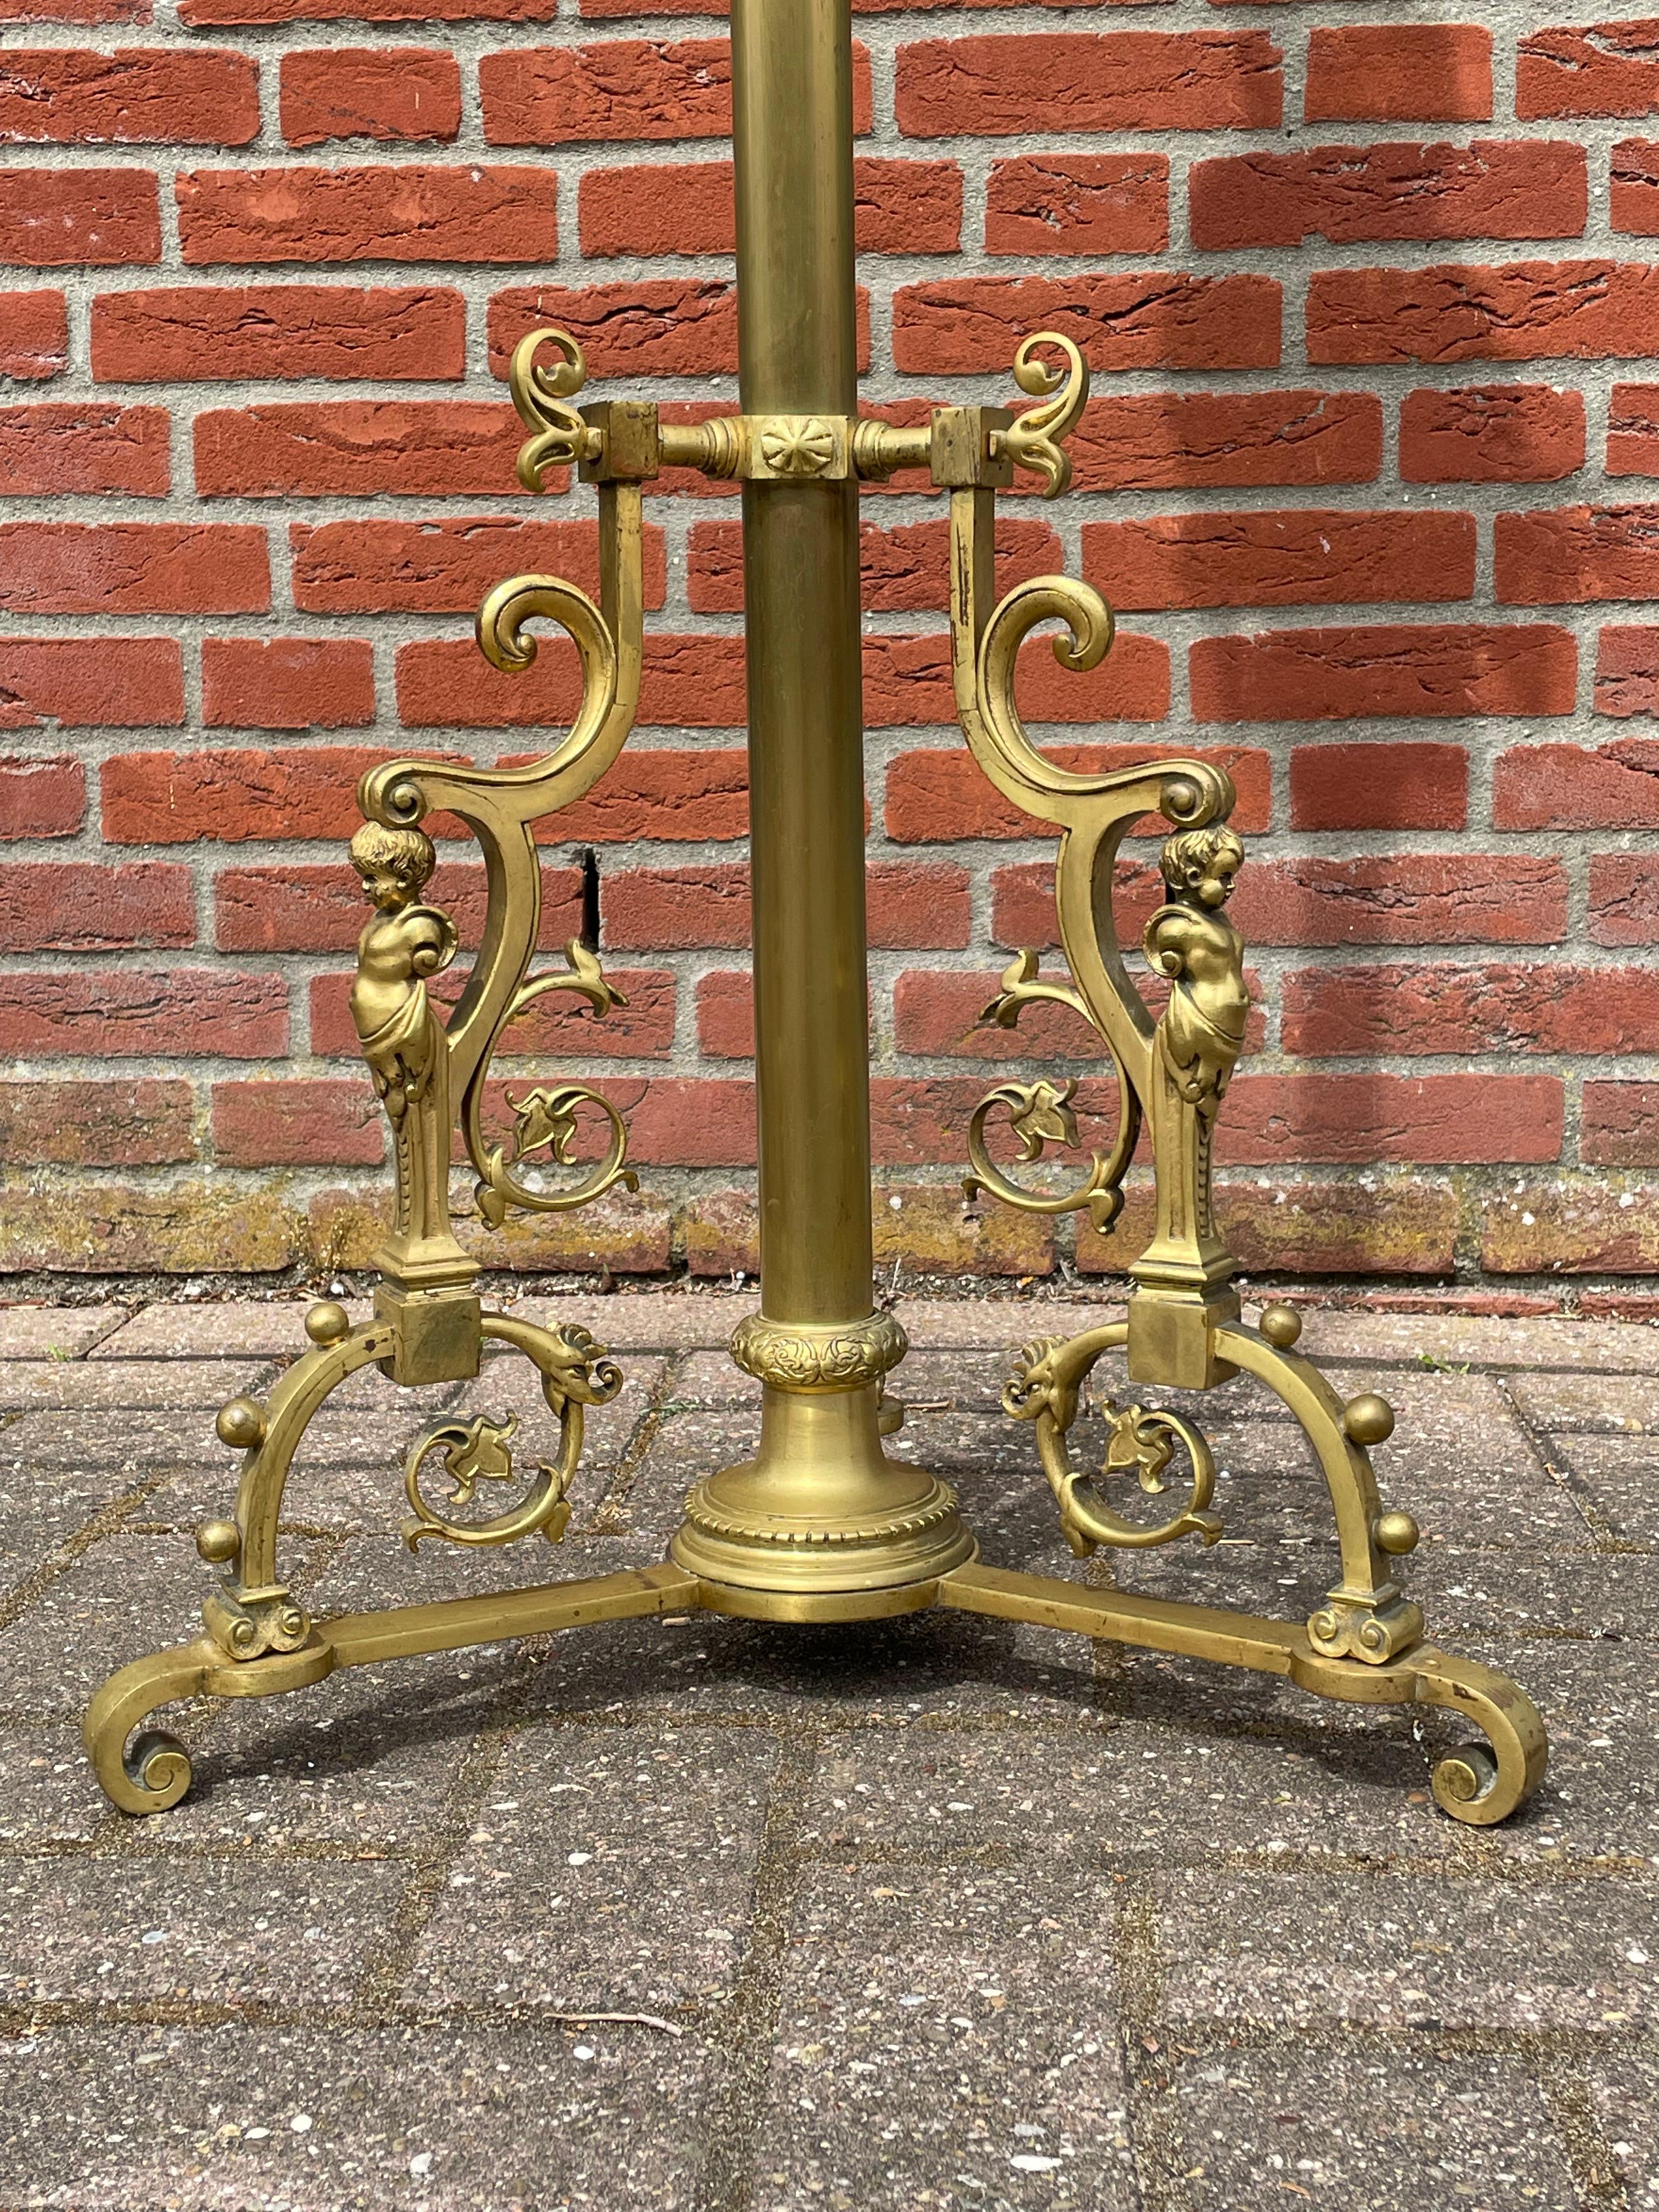 Stunning 19th Century Empire Revival Bronze & Glass Oil Floor Lamp By H. Luppens For Sale 7